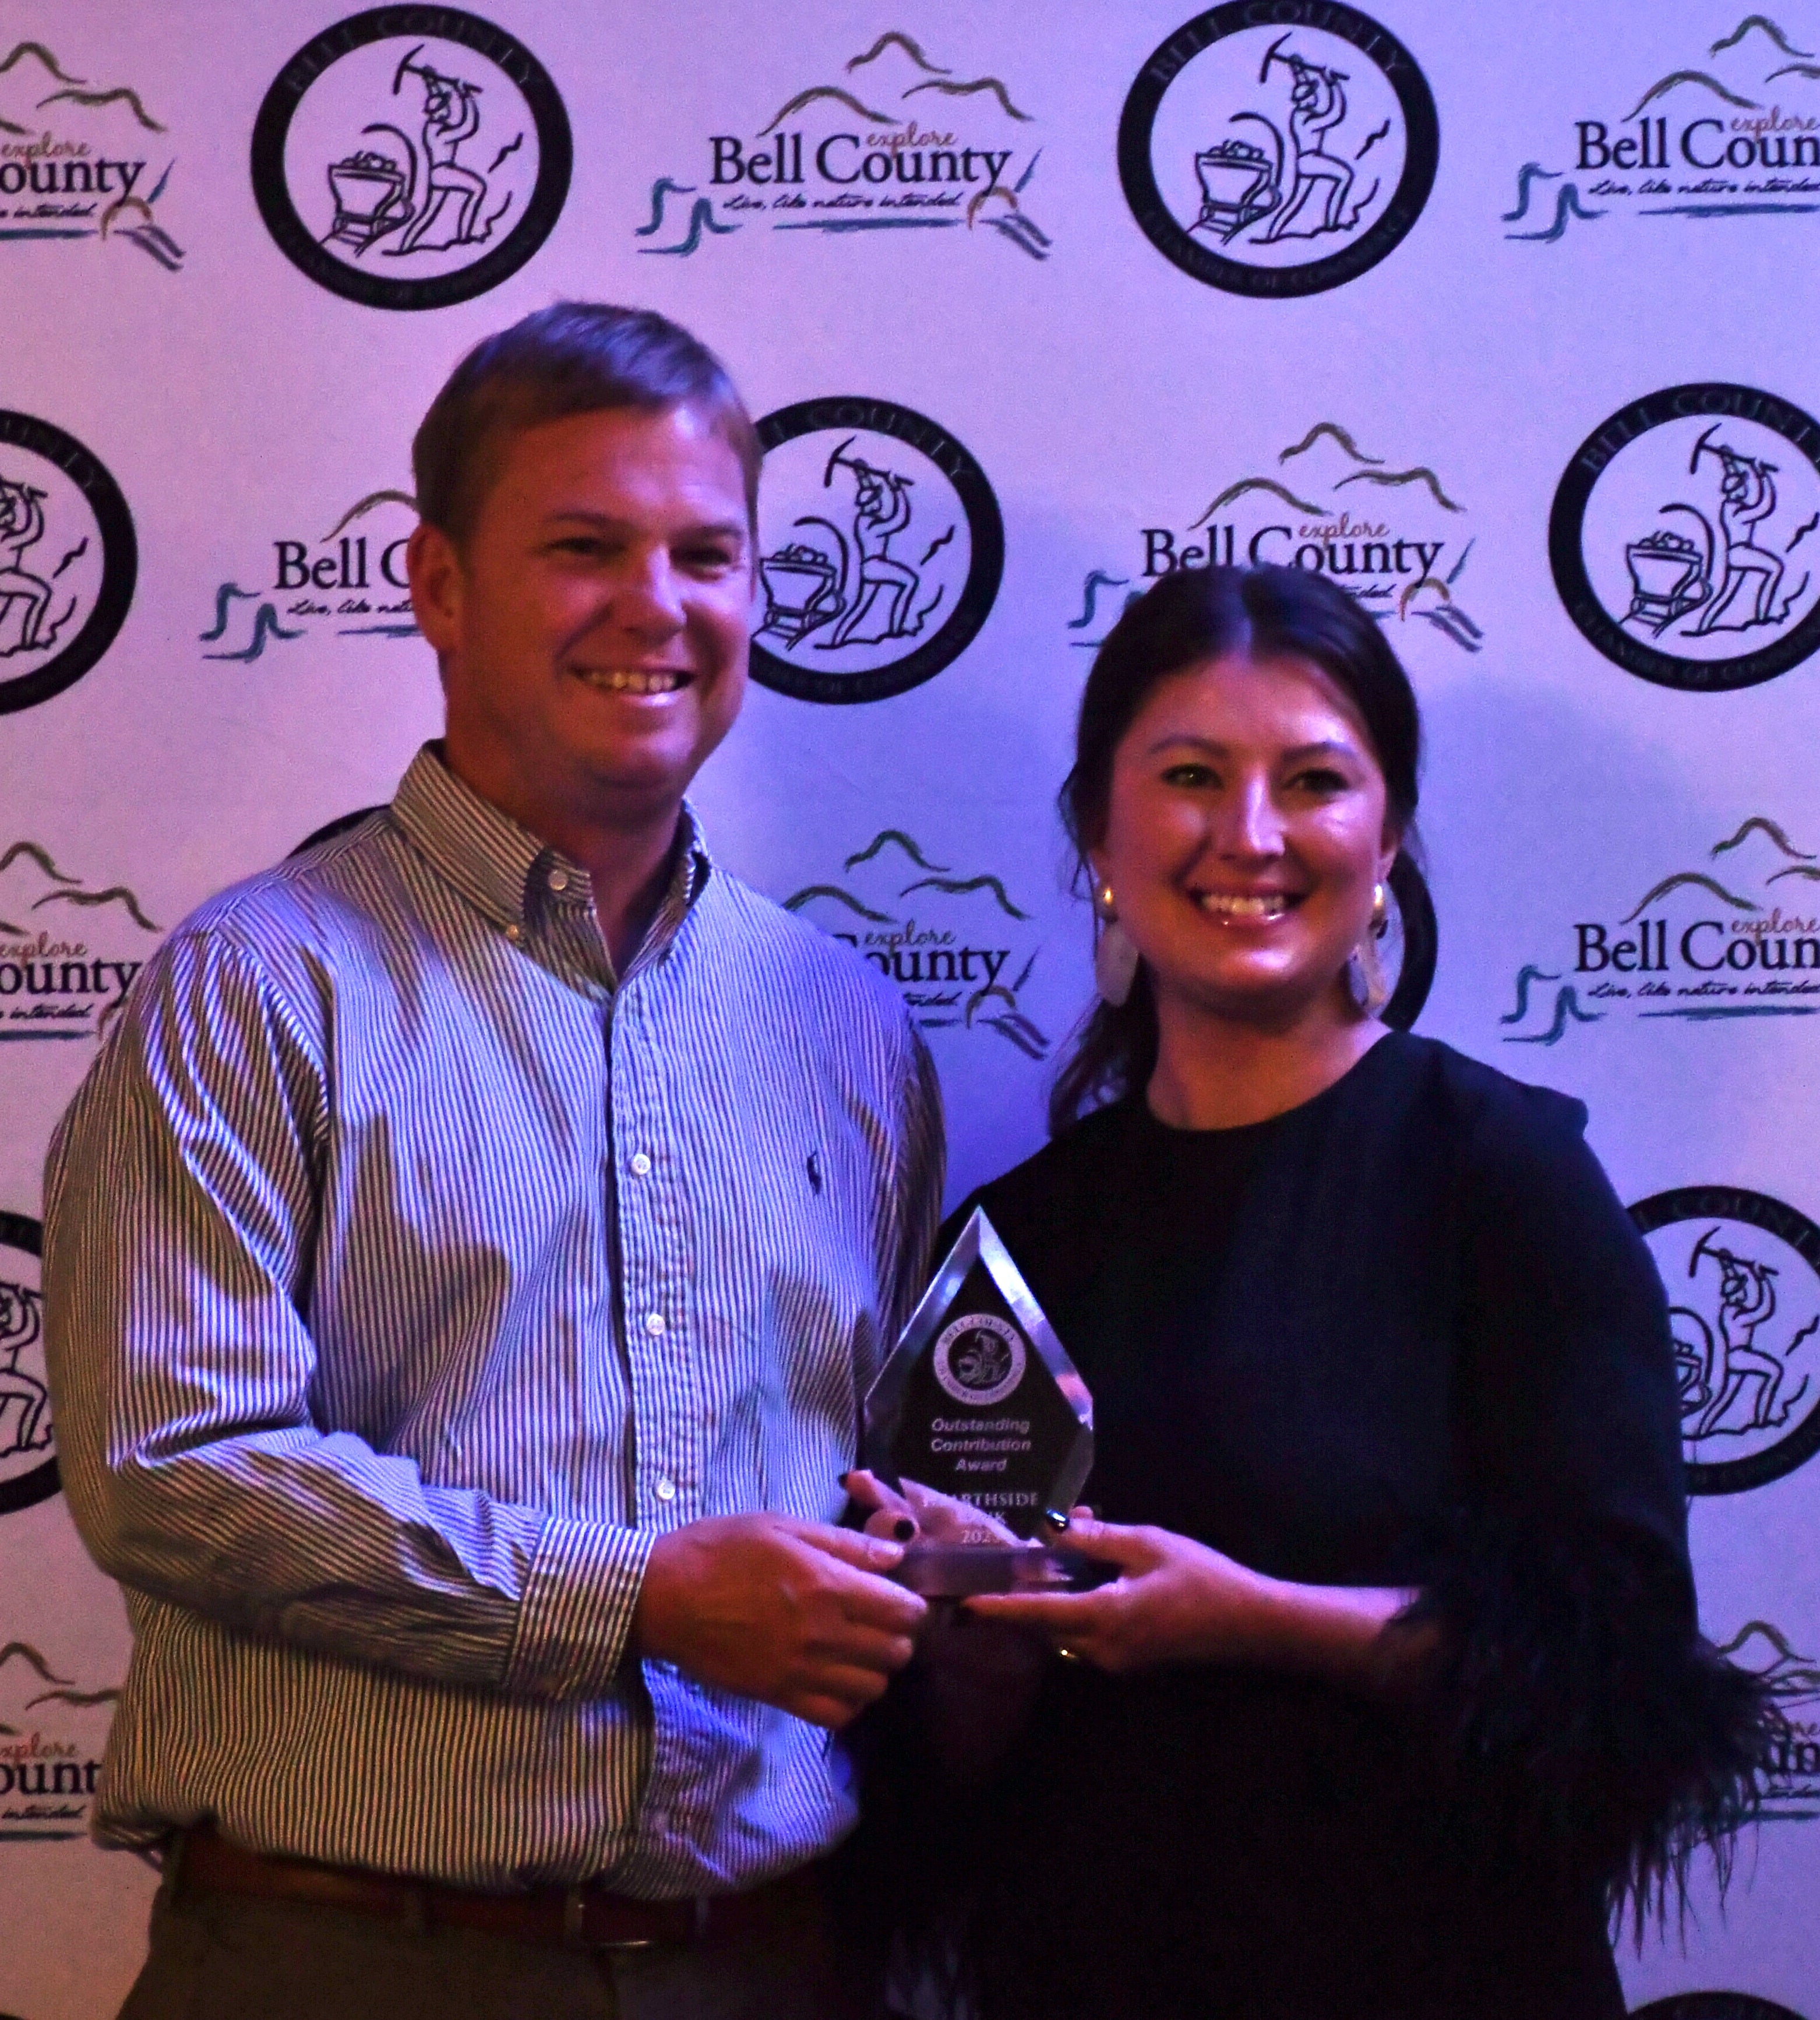 OUTSTANDING CONTRIBUTION AWARD WINNER HEARTHSIDE BANK (LEFT) WITH CHAMBER OF COMMERCE DIRECTOR MELISSA TURNER (RIGHT)